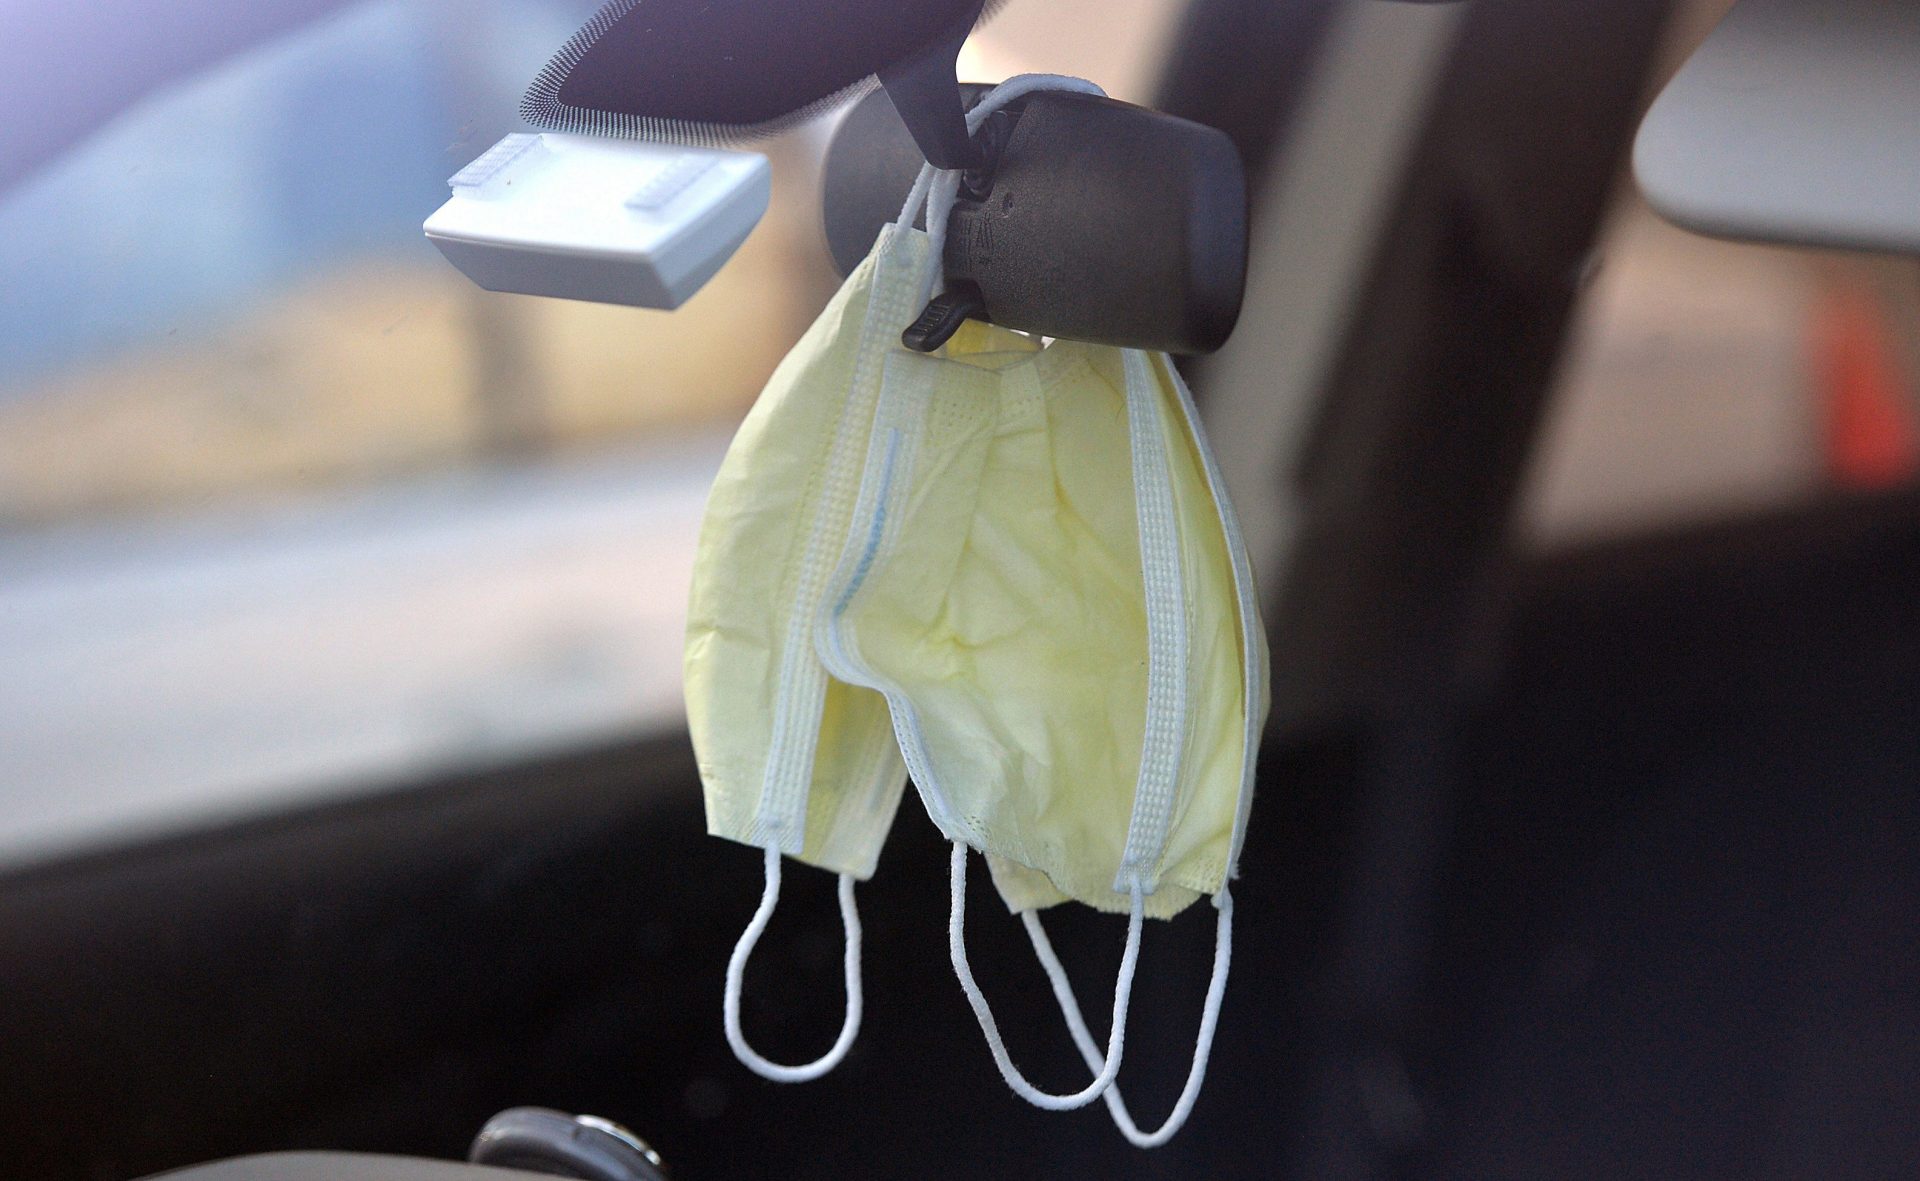 Face masks hang from the rearview mirror of a vehicle Friday, May 1, 2020, in Fairview Township, Pa., during the coronavirus pandemic. (Christopher Millette/Erie Times-News via AP)